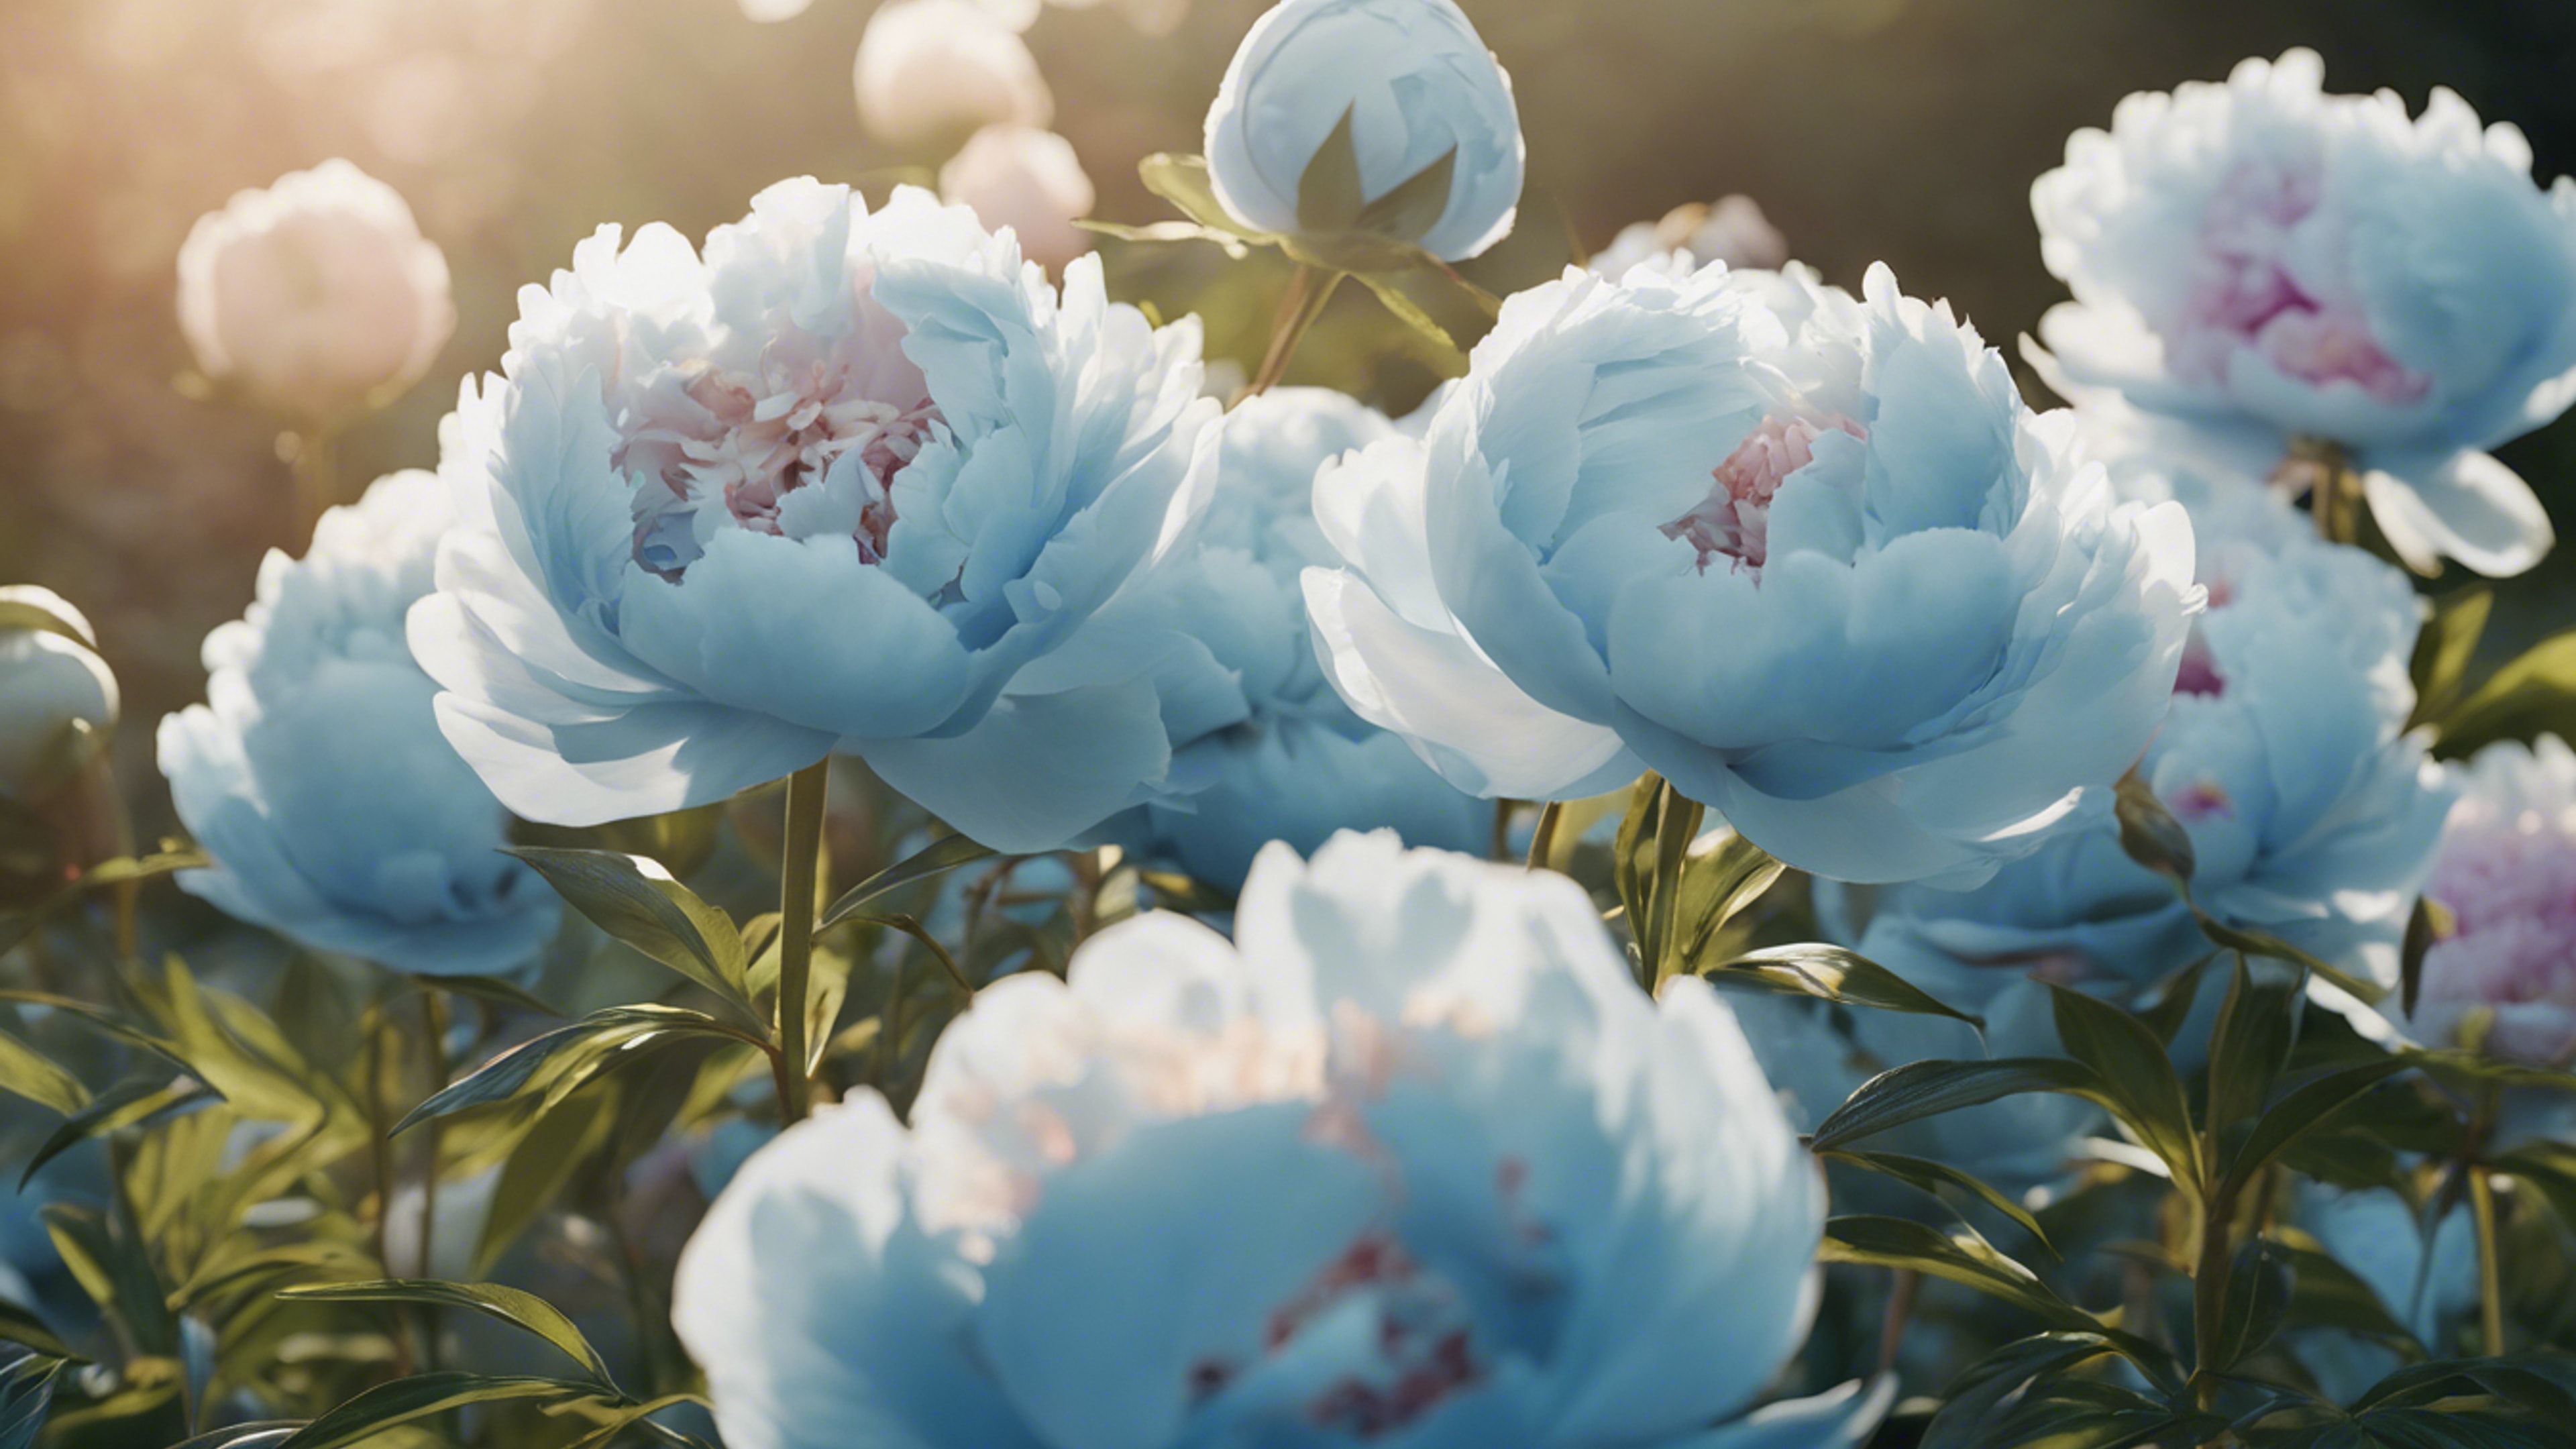 An array of pastel blue peonies blooming in a sunlit garden. Tapet[bebed2869b0c4244859a]